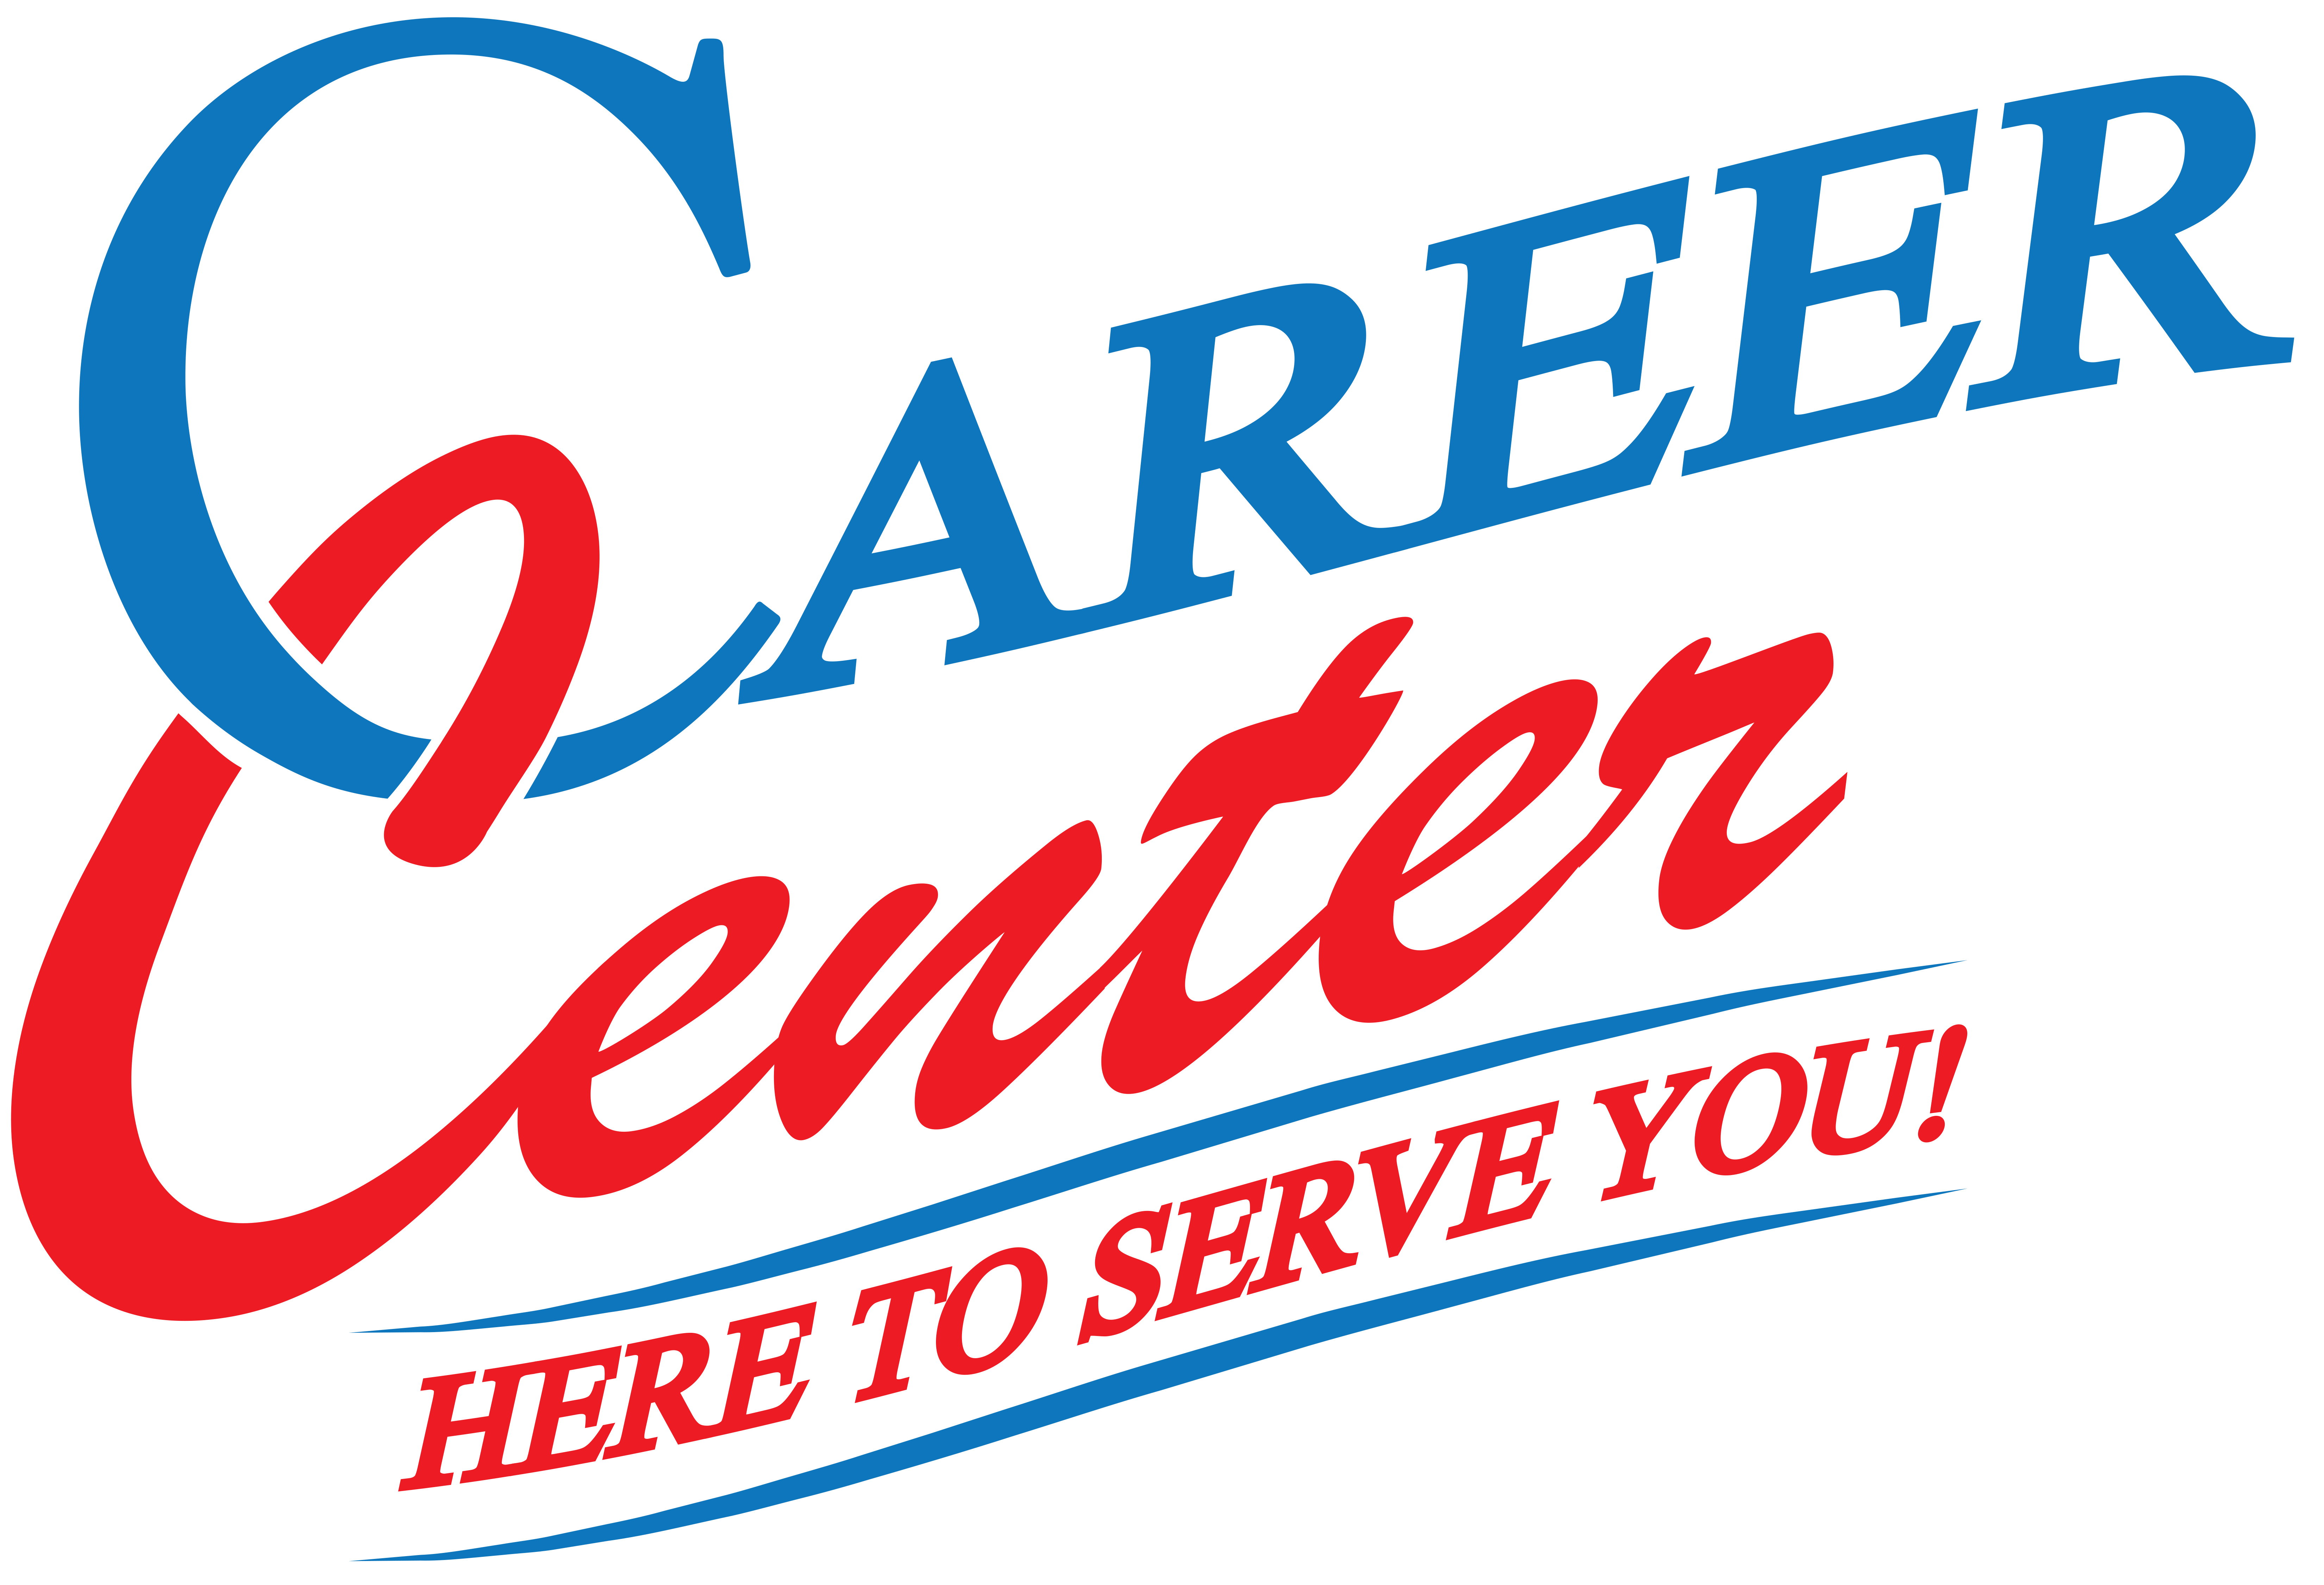 Career Center Here to Serve You